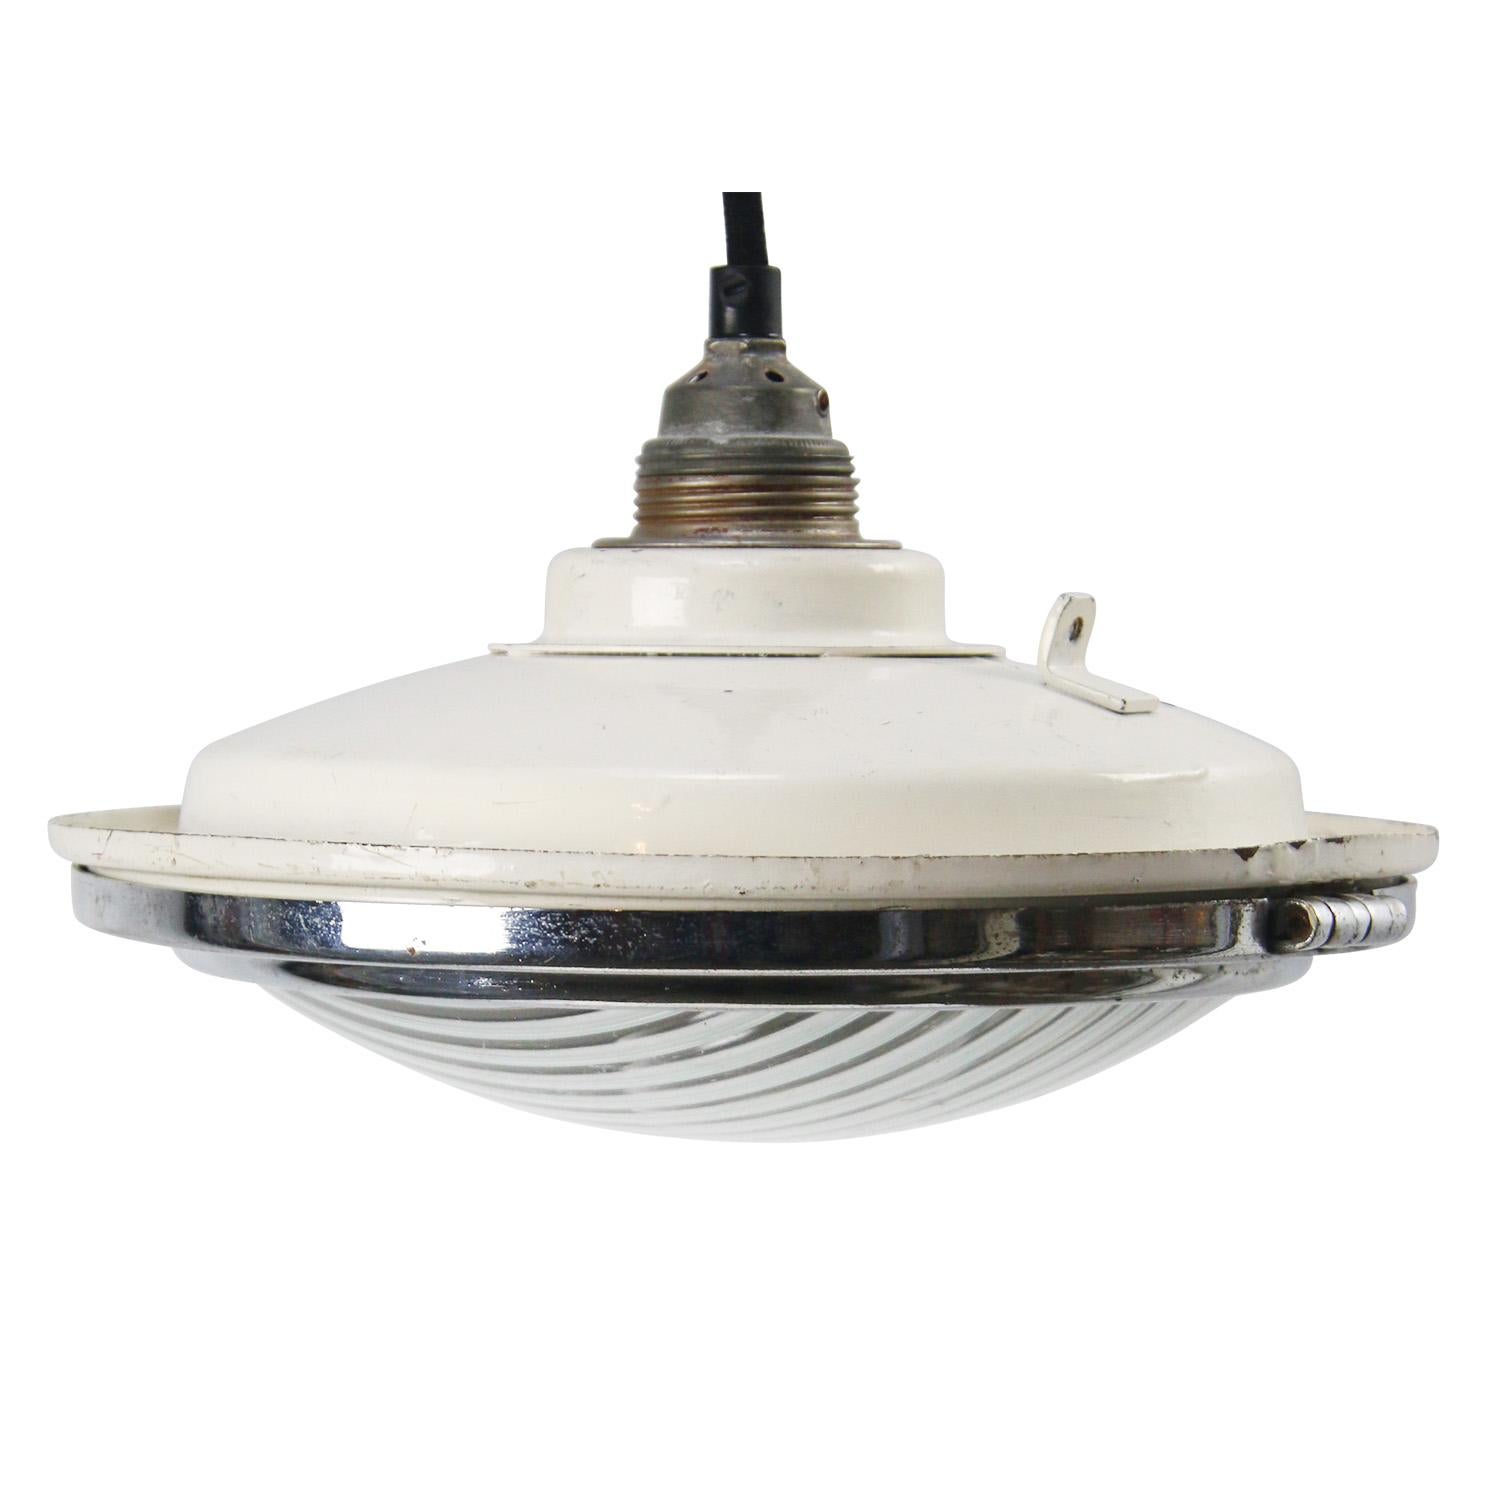 Holophane glass pendant light
Clear striped glass

Previously used as flush mount in train compartment 

Weight: 1.60 kg / 3.5 lb

Priced per individual item. All lamps have been made suitable by international standards for incandescent light